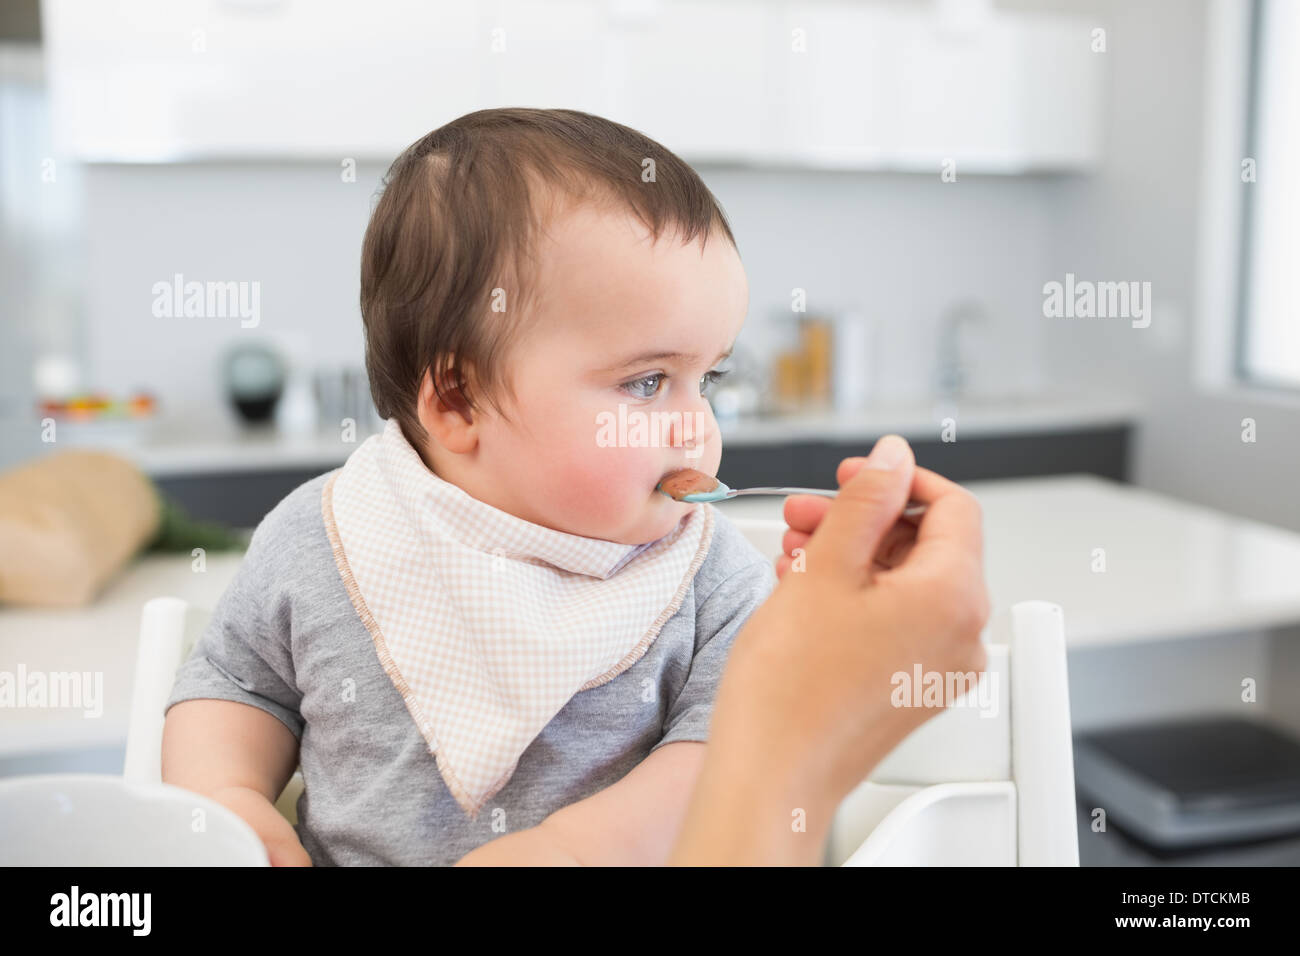 Adorable baby being fed by mother Stock Photo